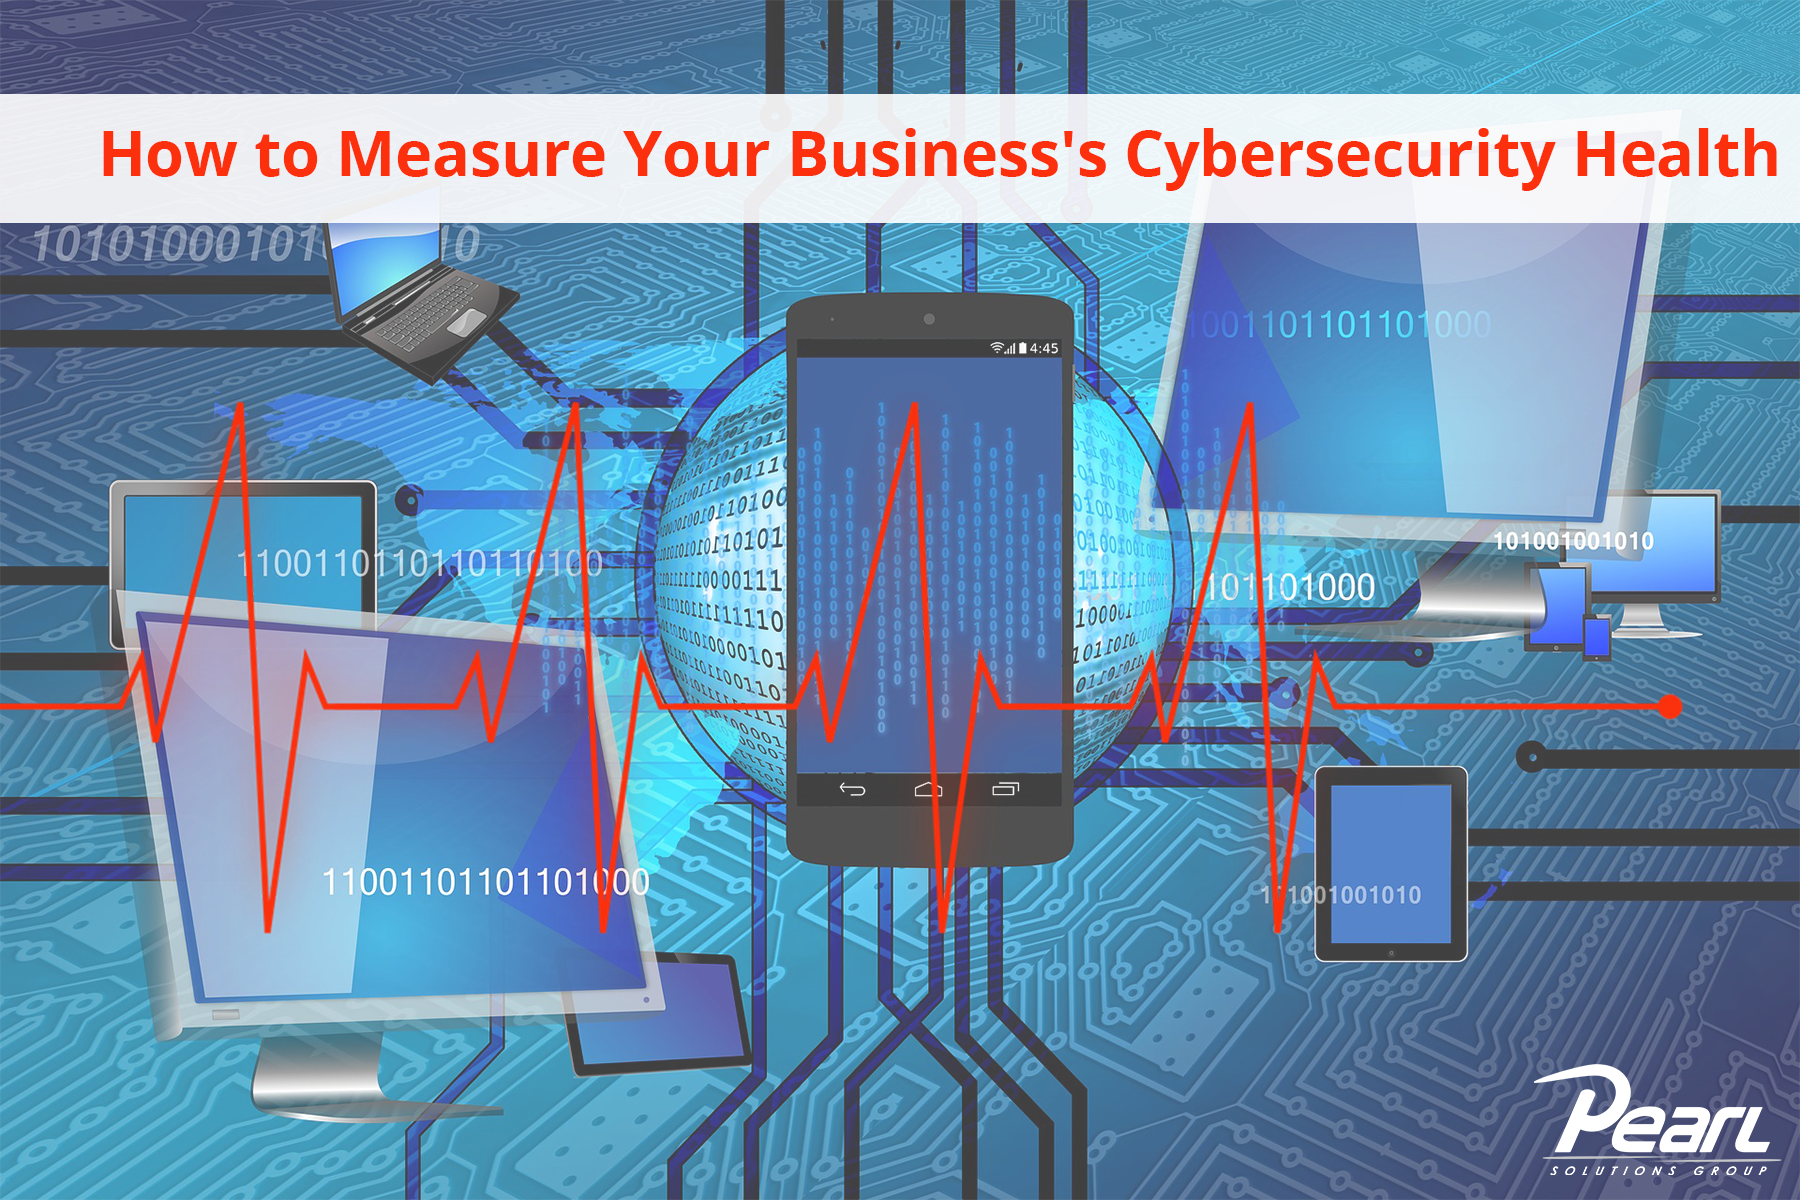 How to Measure Your Business's Cybersecurity Health